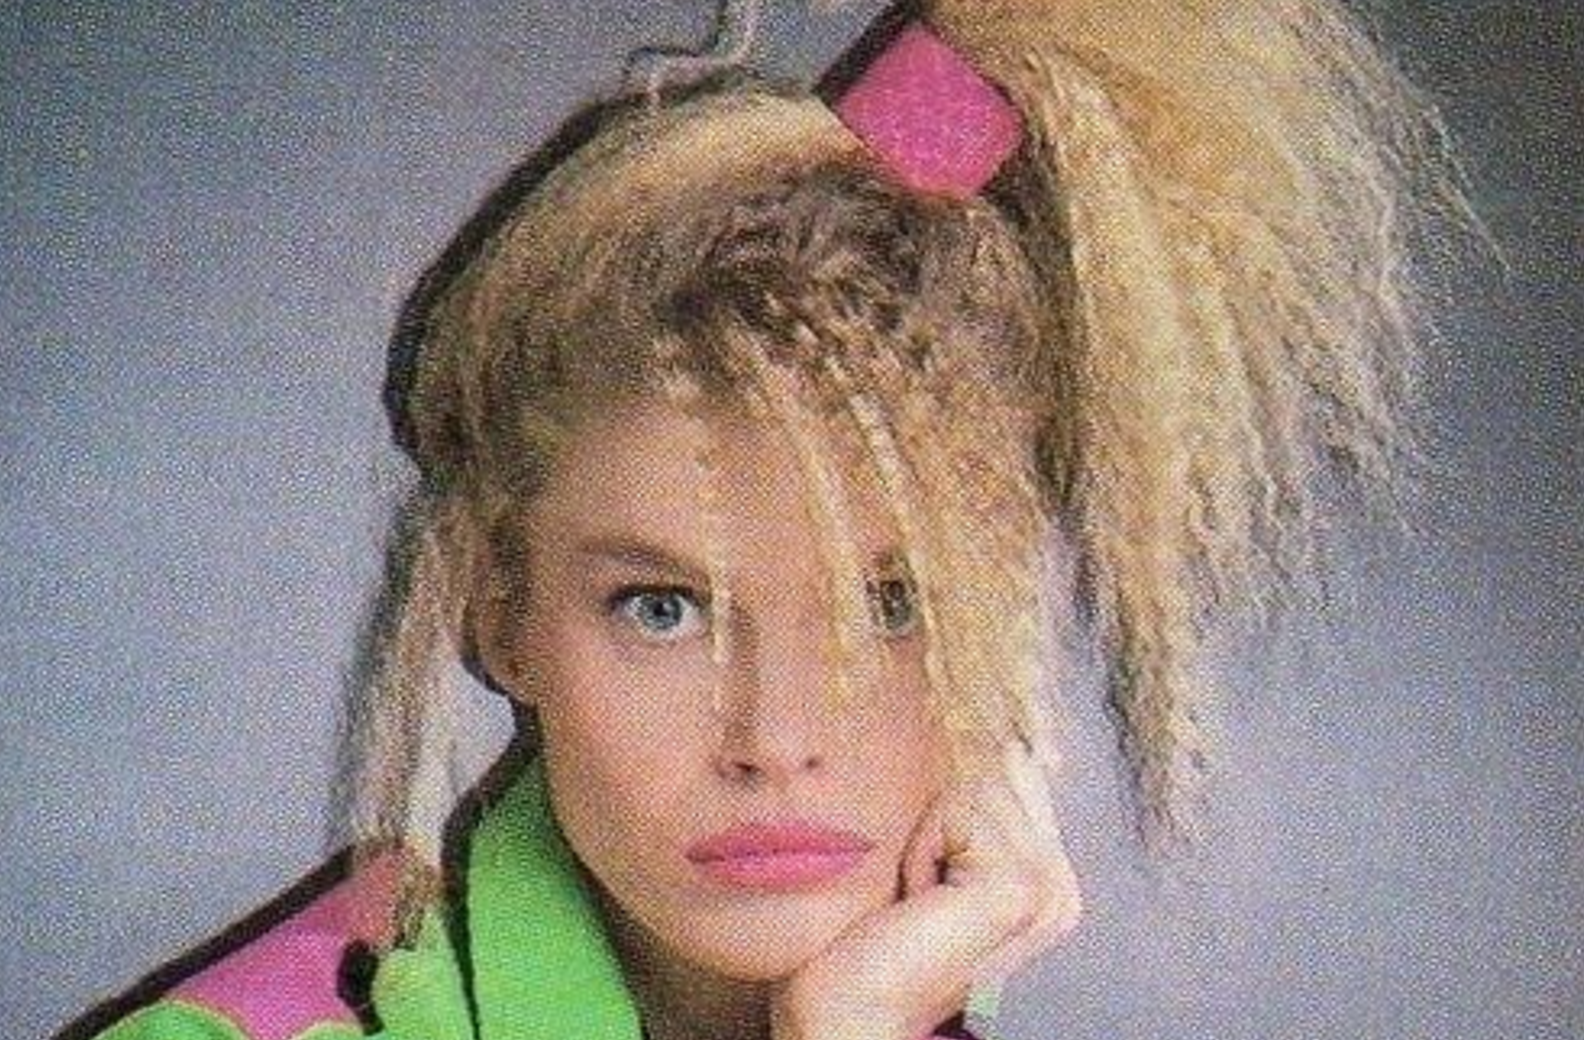 Hairstyles Of The 80s Go Big Or Stay Home Do You Remember